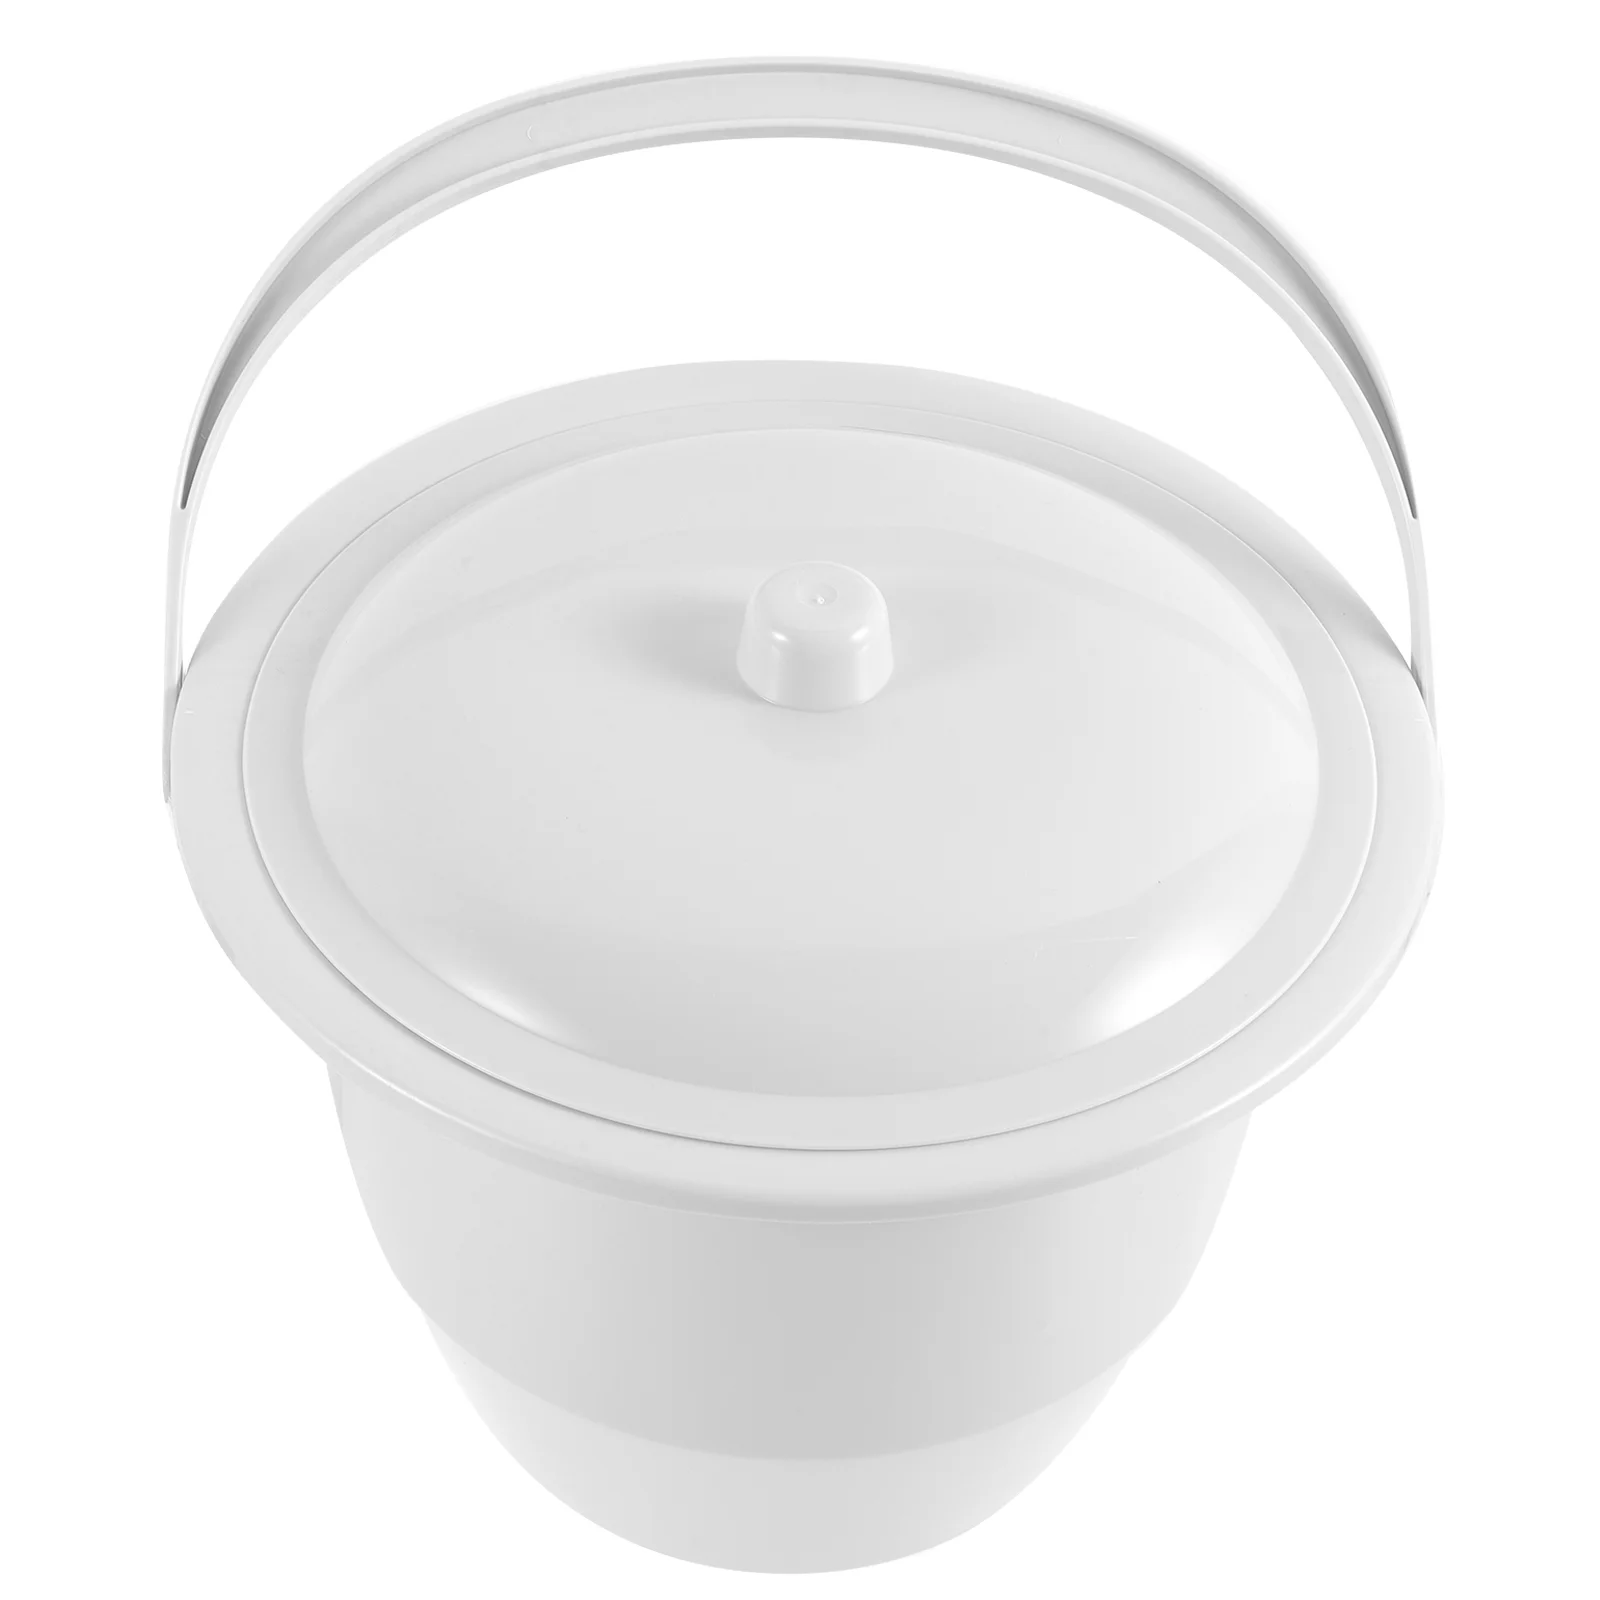 

Urinal Spittoon Commode Household Chamber Pot Portable Toilet Plastic Urine Bucket Bedpan